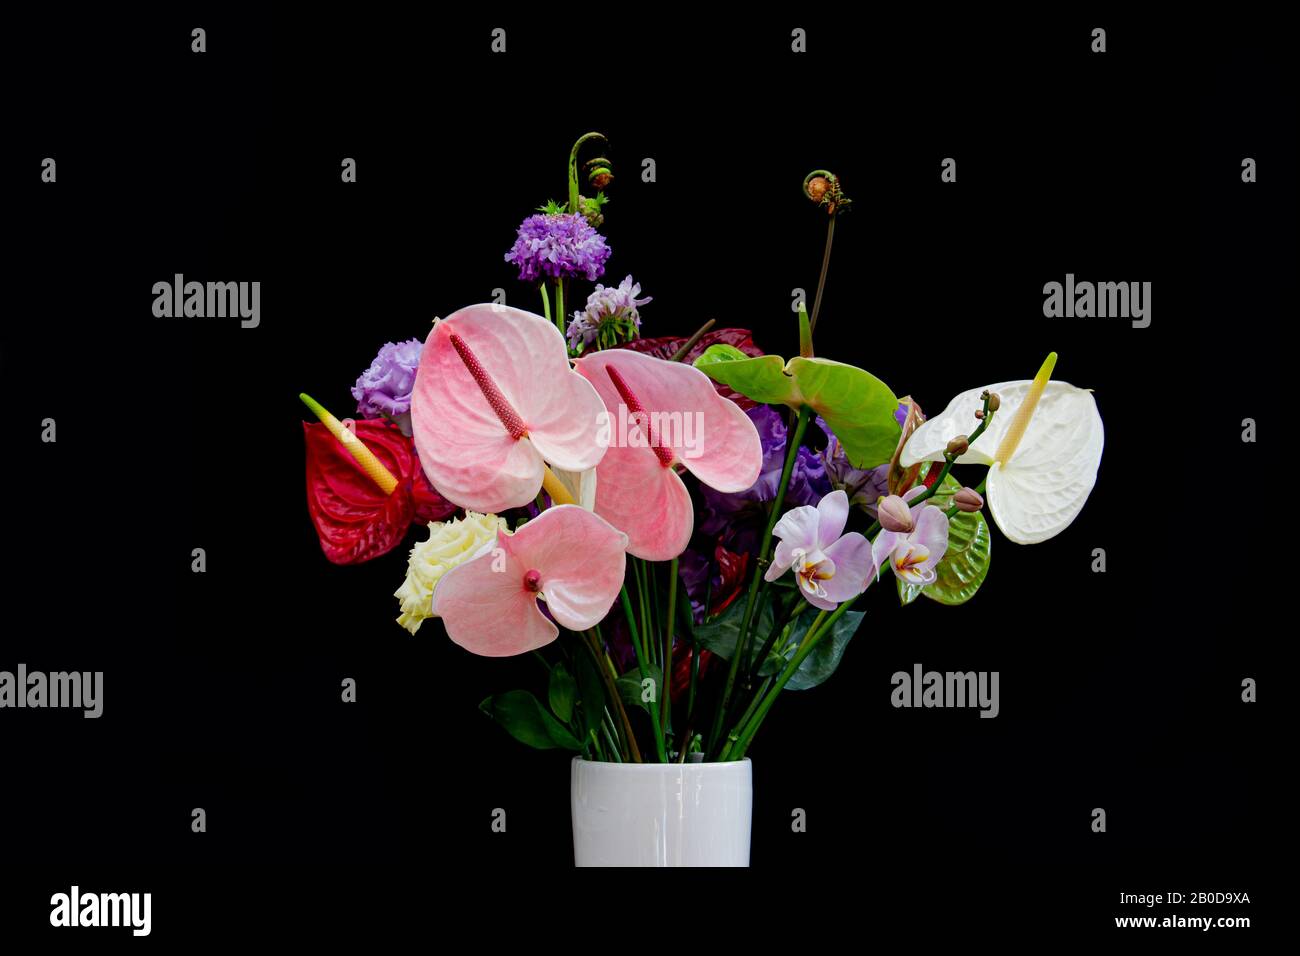 Colorful flower bouquet with red and white Flamingo Flowers, violet Lisianthus or Eustoma, Orchid and rolled up fern isolated on black background Stock Photo